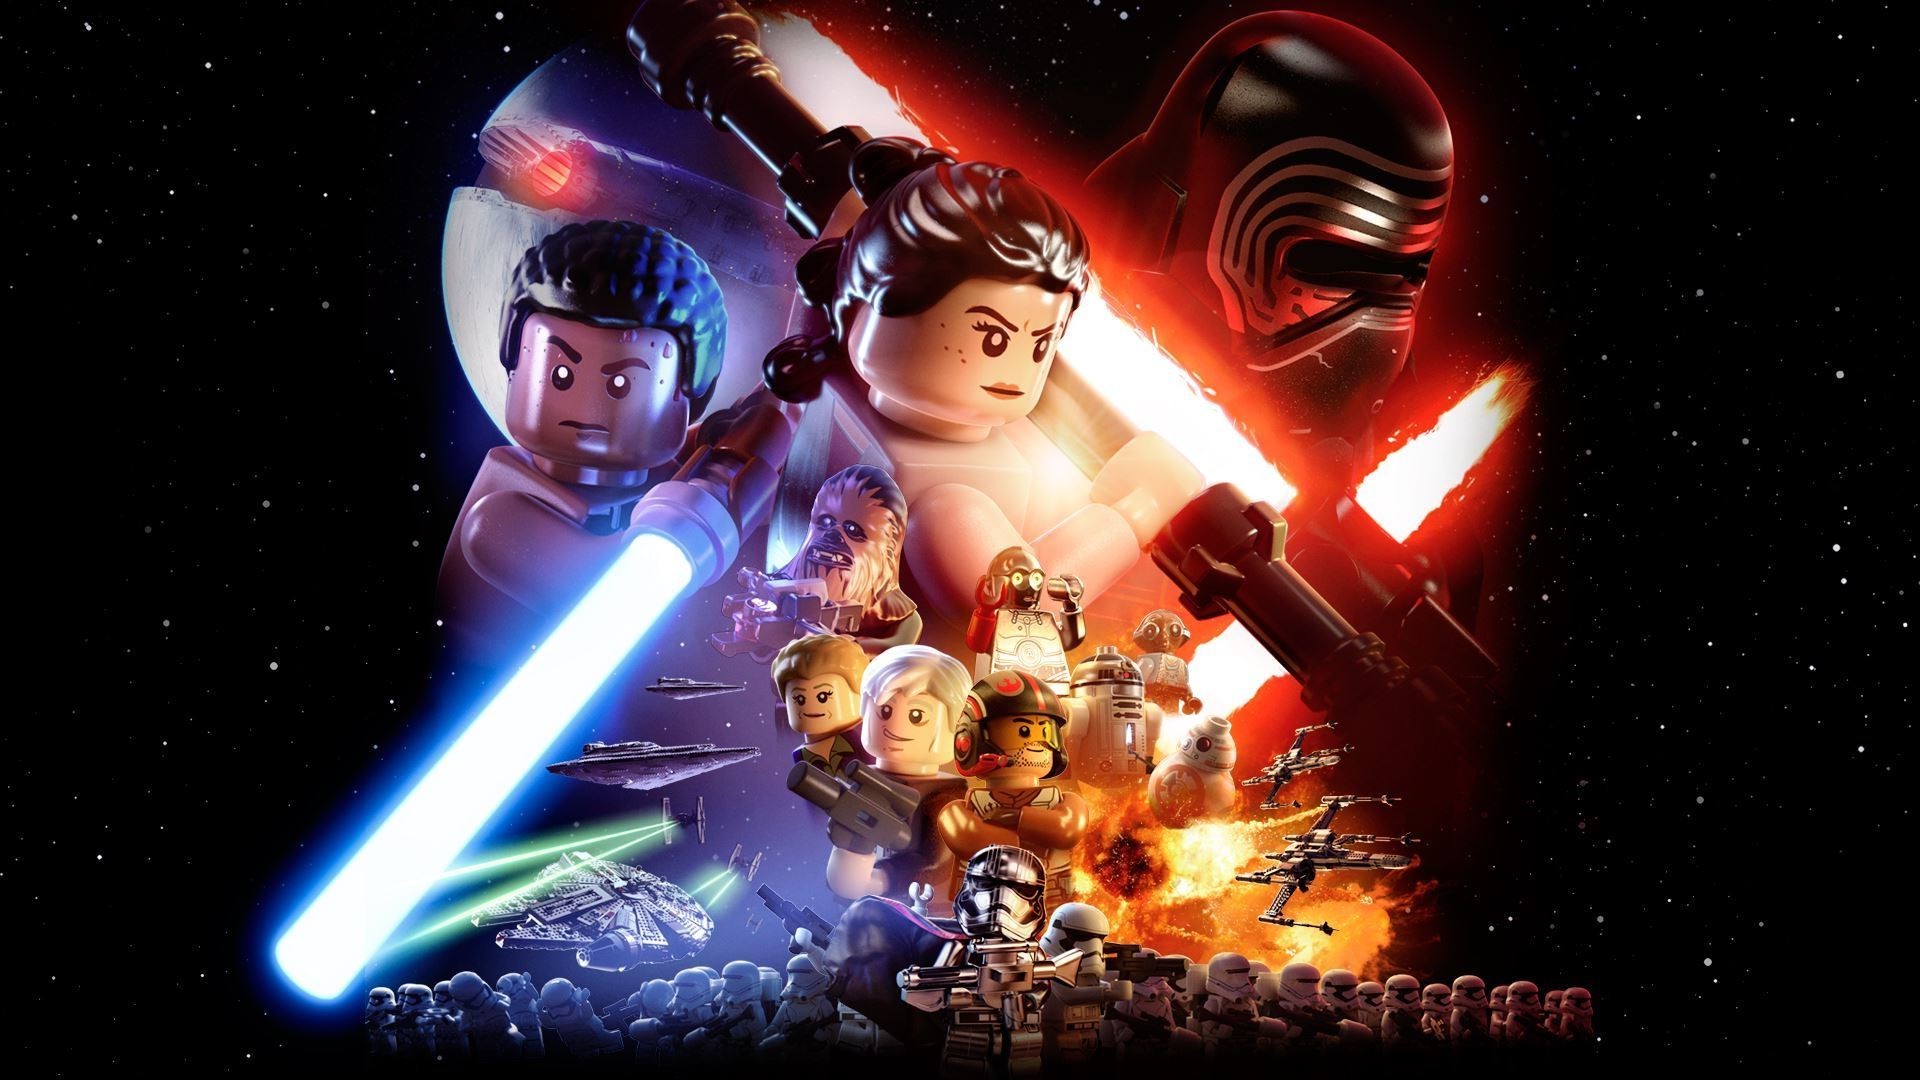 the force awakens game download free